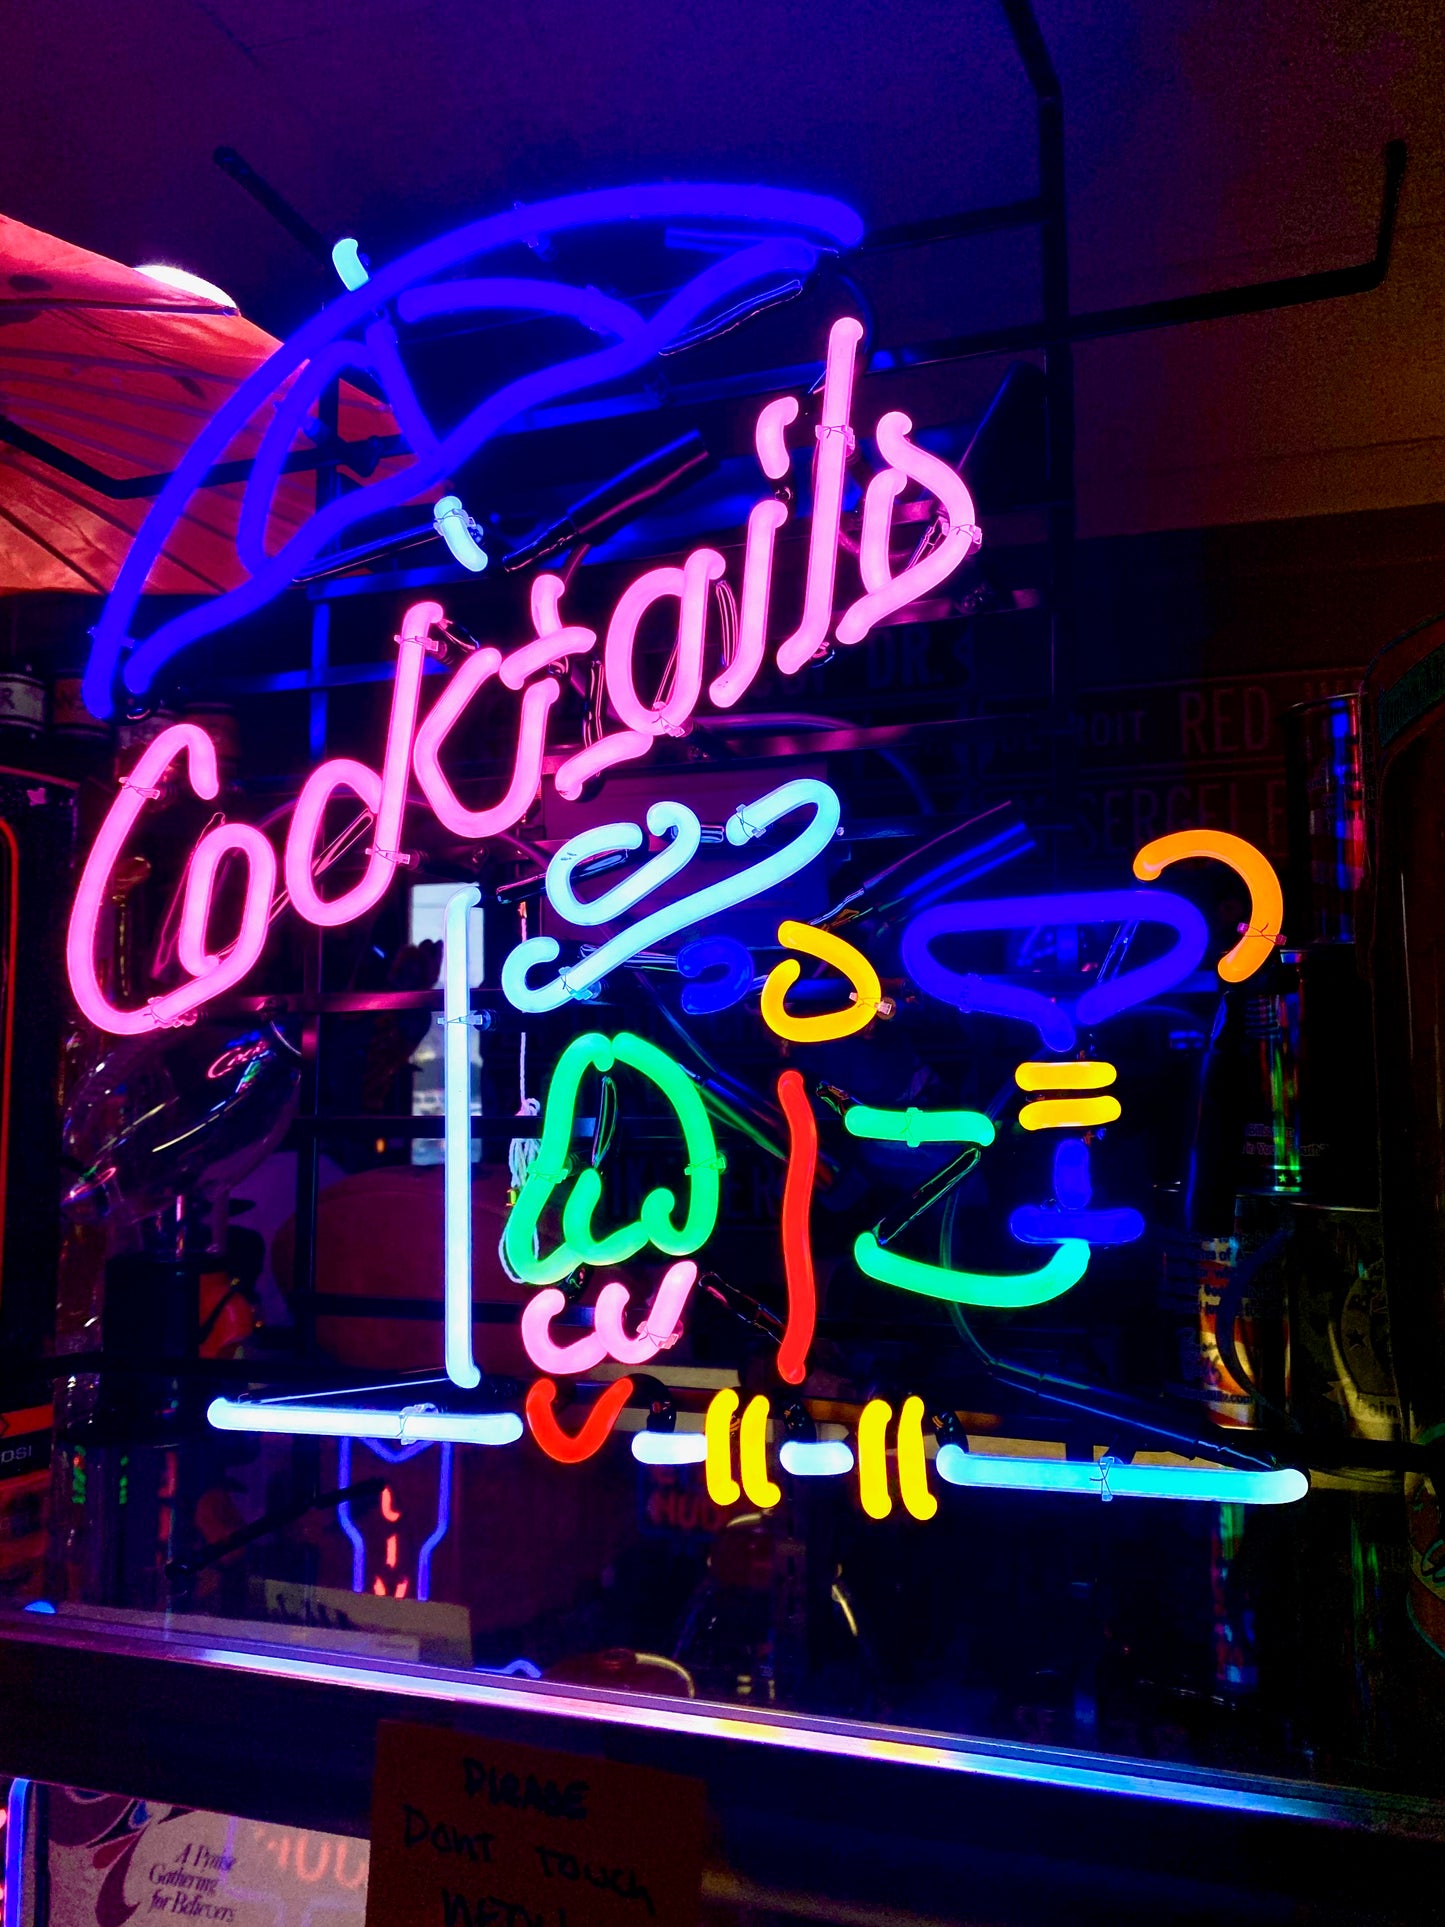 Cocktails Standard Neon Sign *LOCAL PICKUP ONLY*